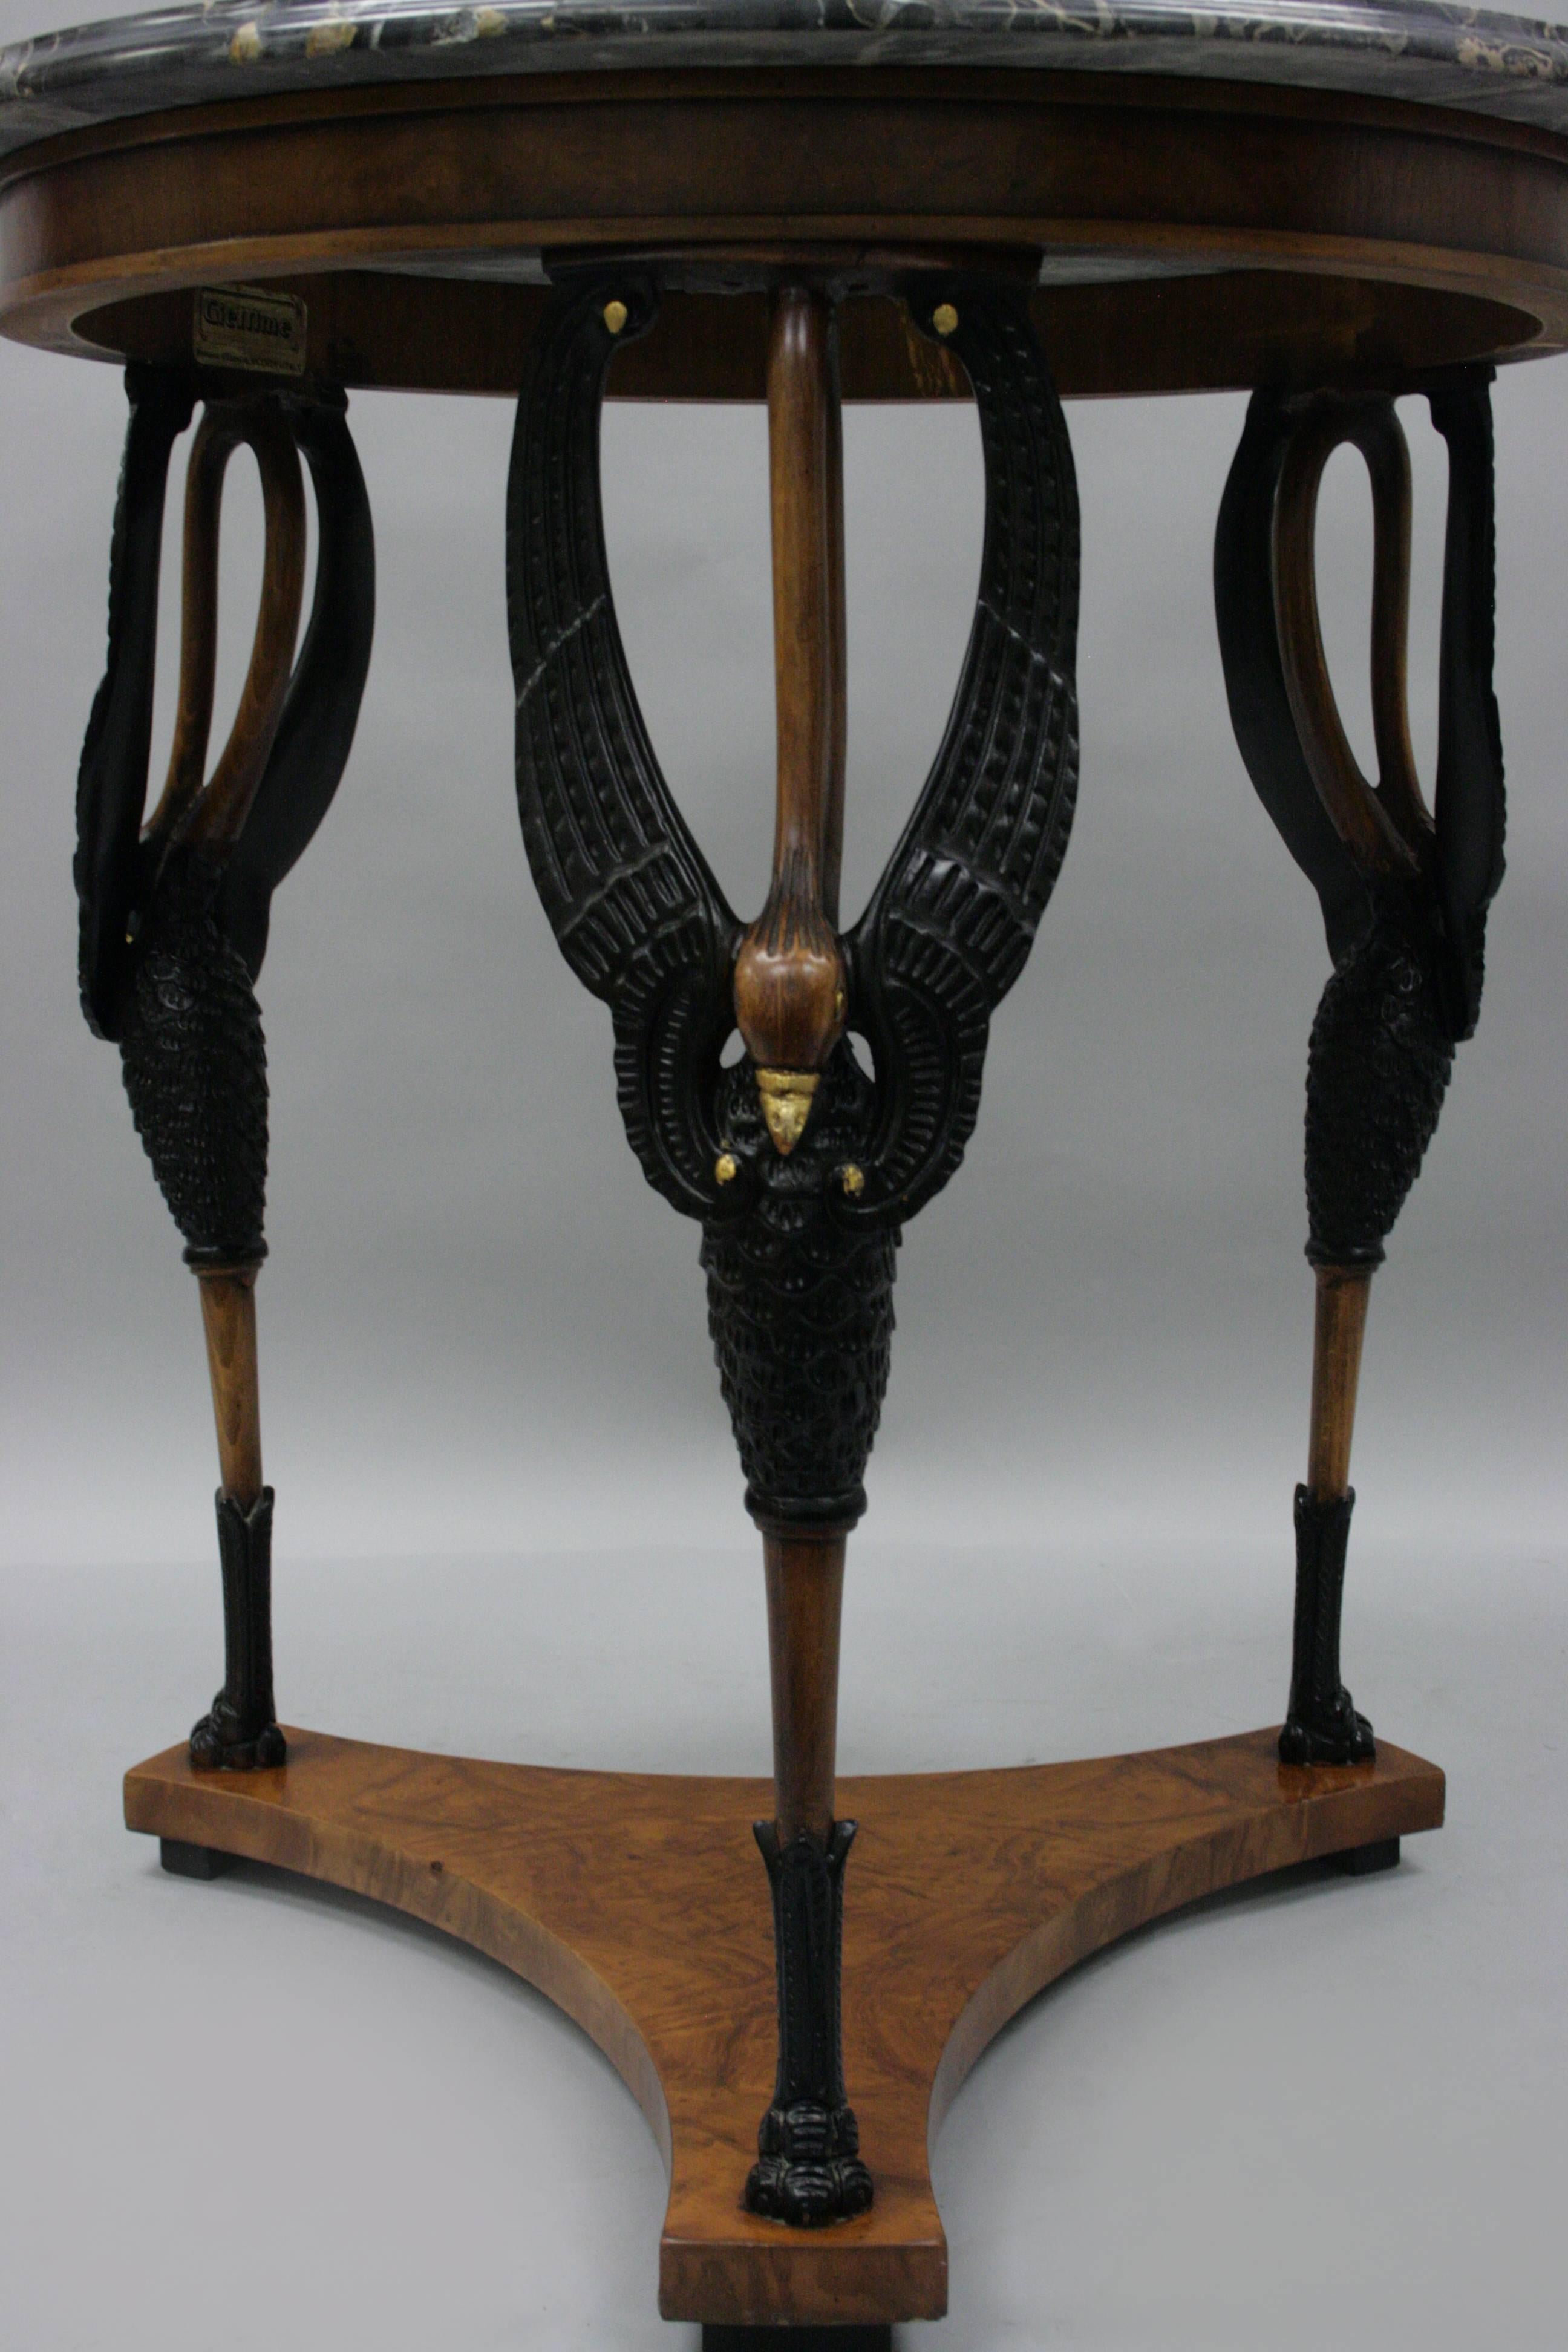 Vintage Italian Regency neoclassical Empire style figural swan tripod Gueridon Center Table by Giemme. Item features a solid carved wood frame with three full winged swan birds, burl wood plinth, paw feet, black and gold painted accents, and a 1